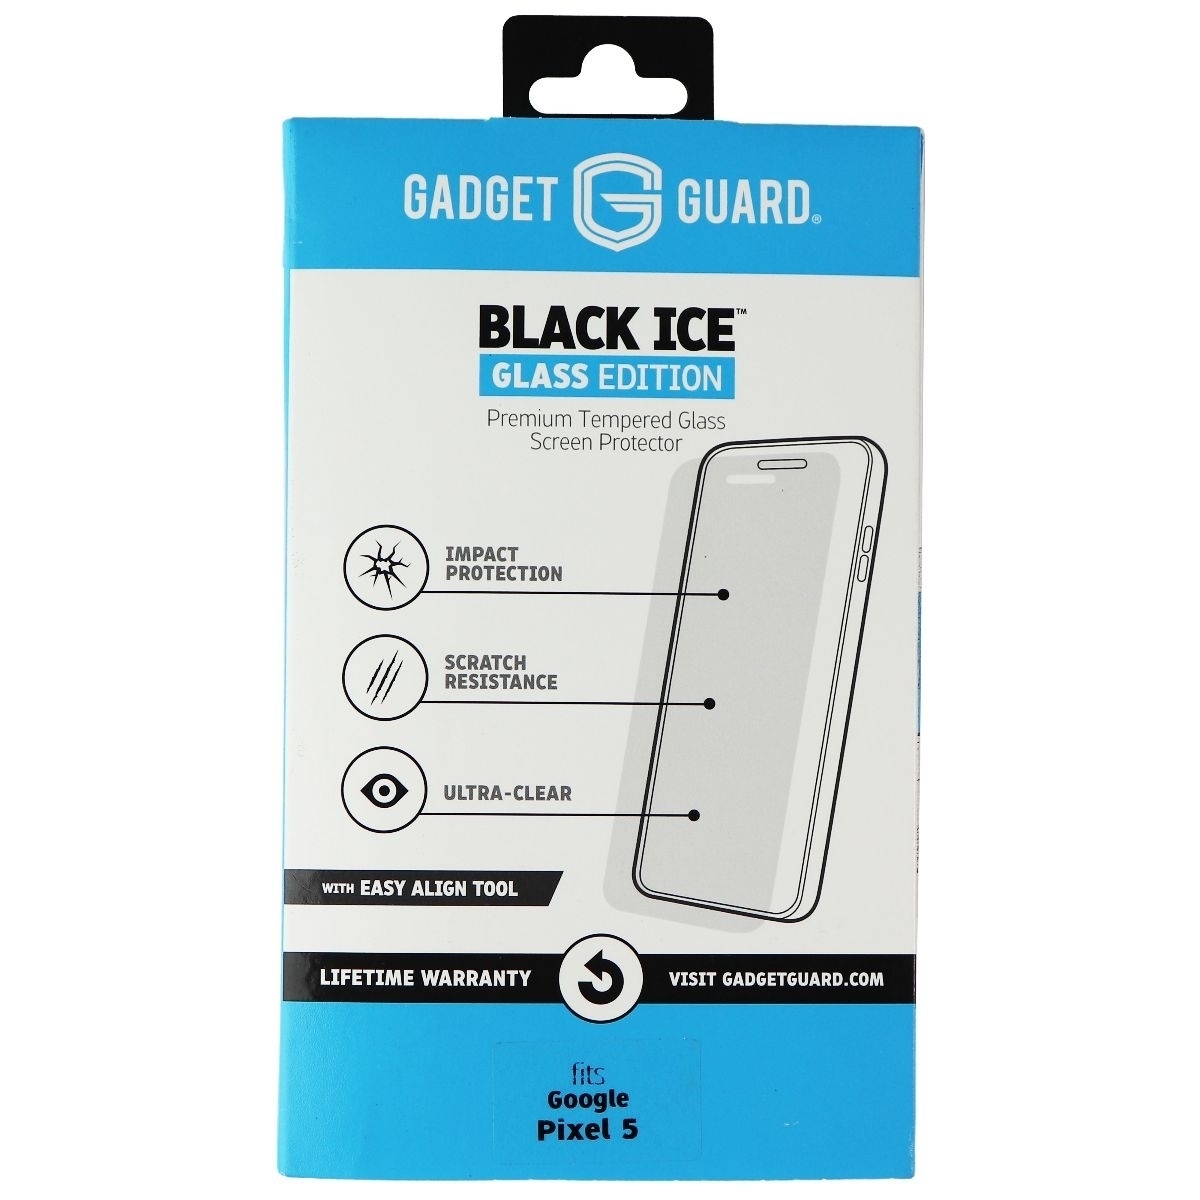 Gadget Guard Black Ice Glass Edition Screen Protector For Google Pixel 5